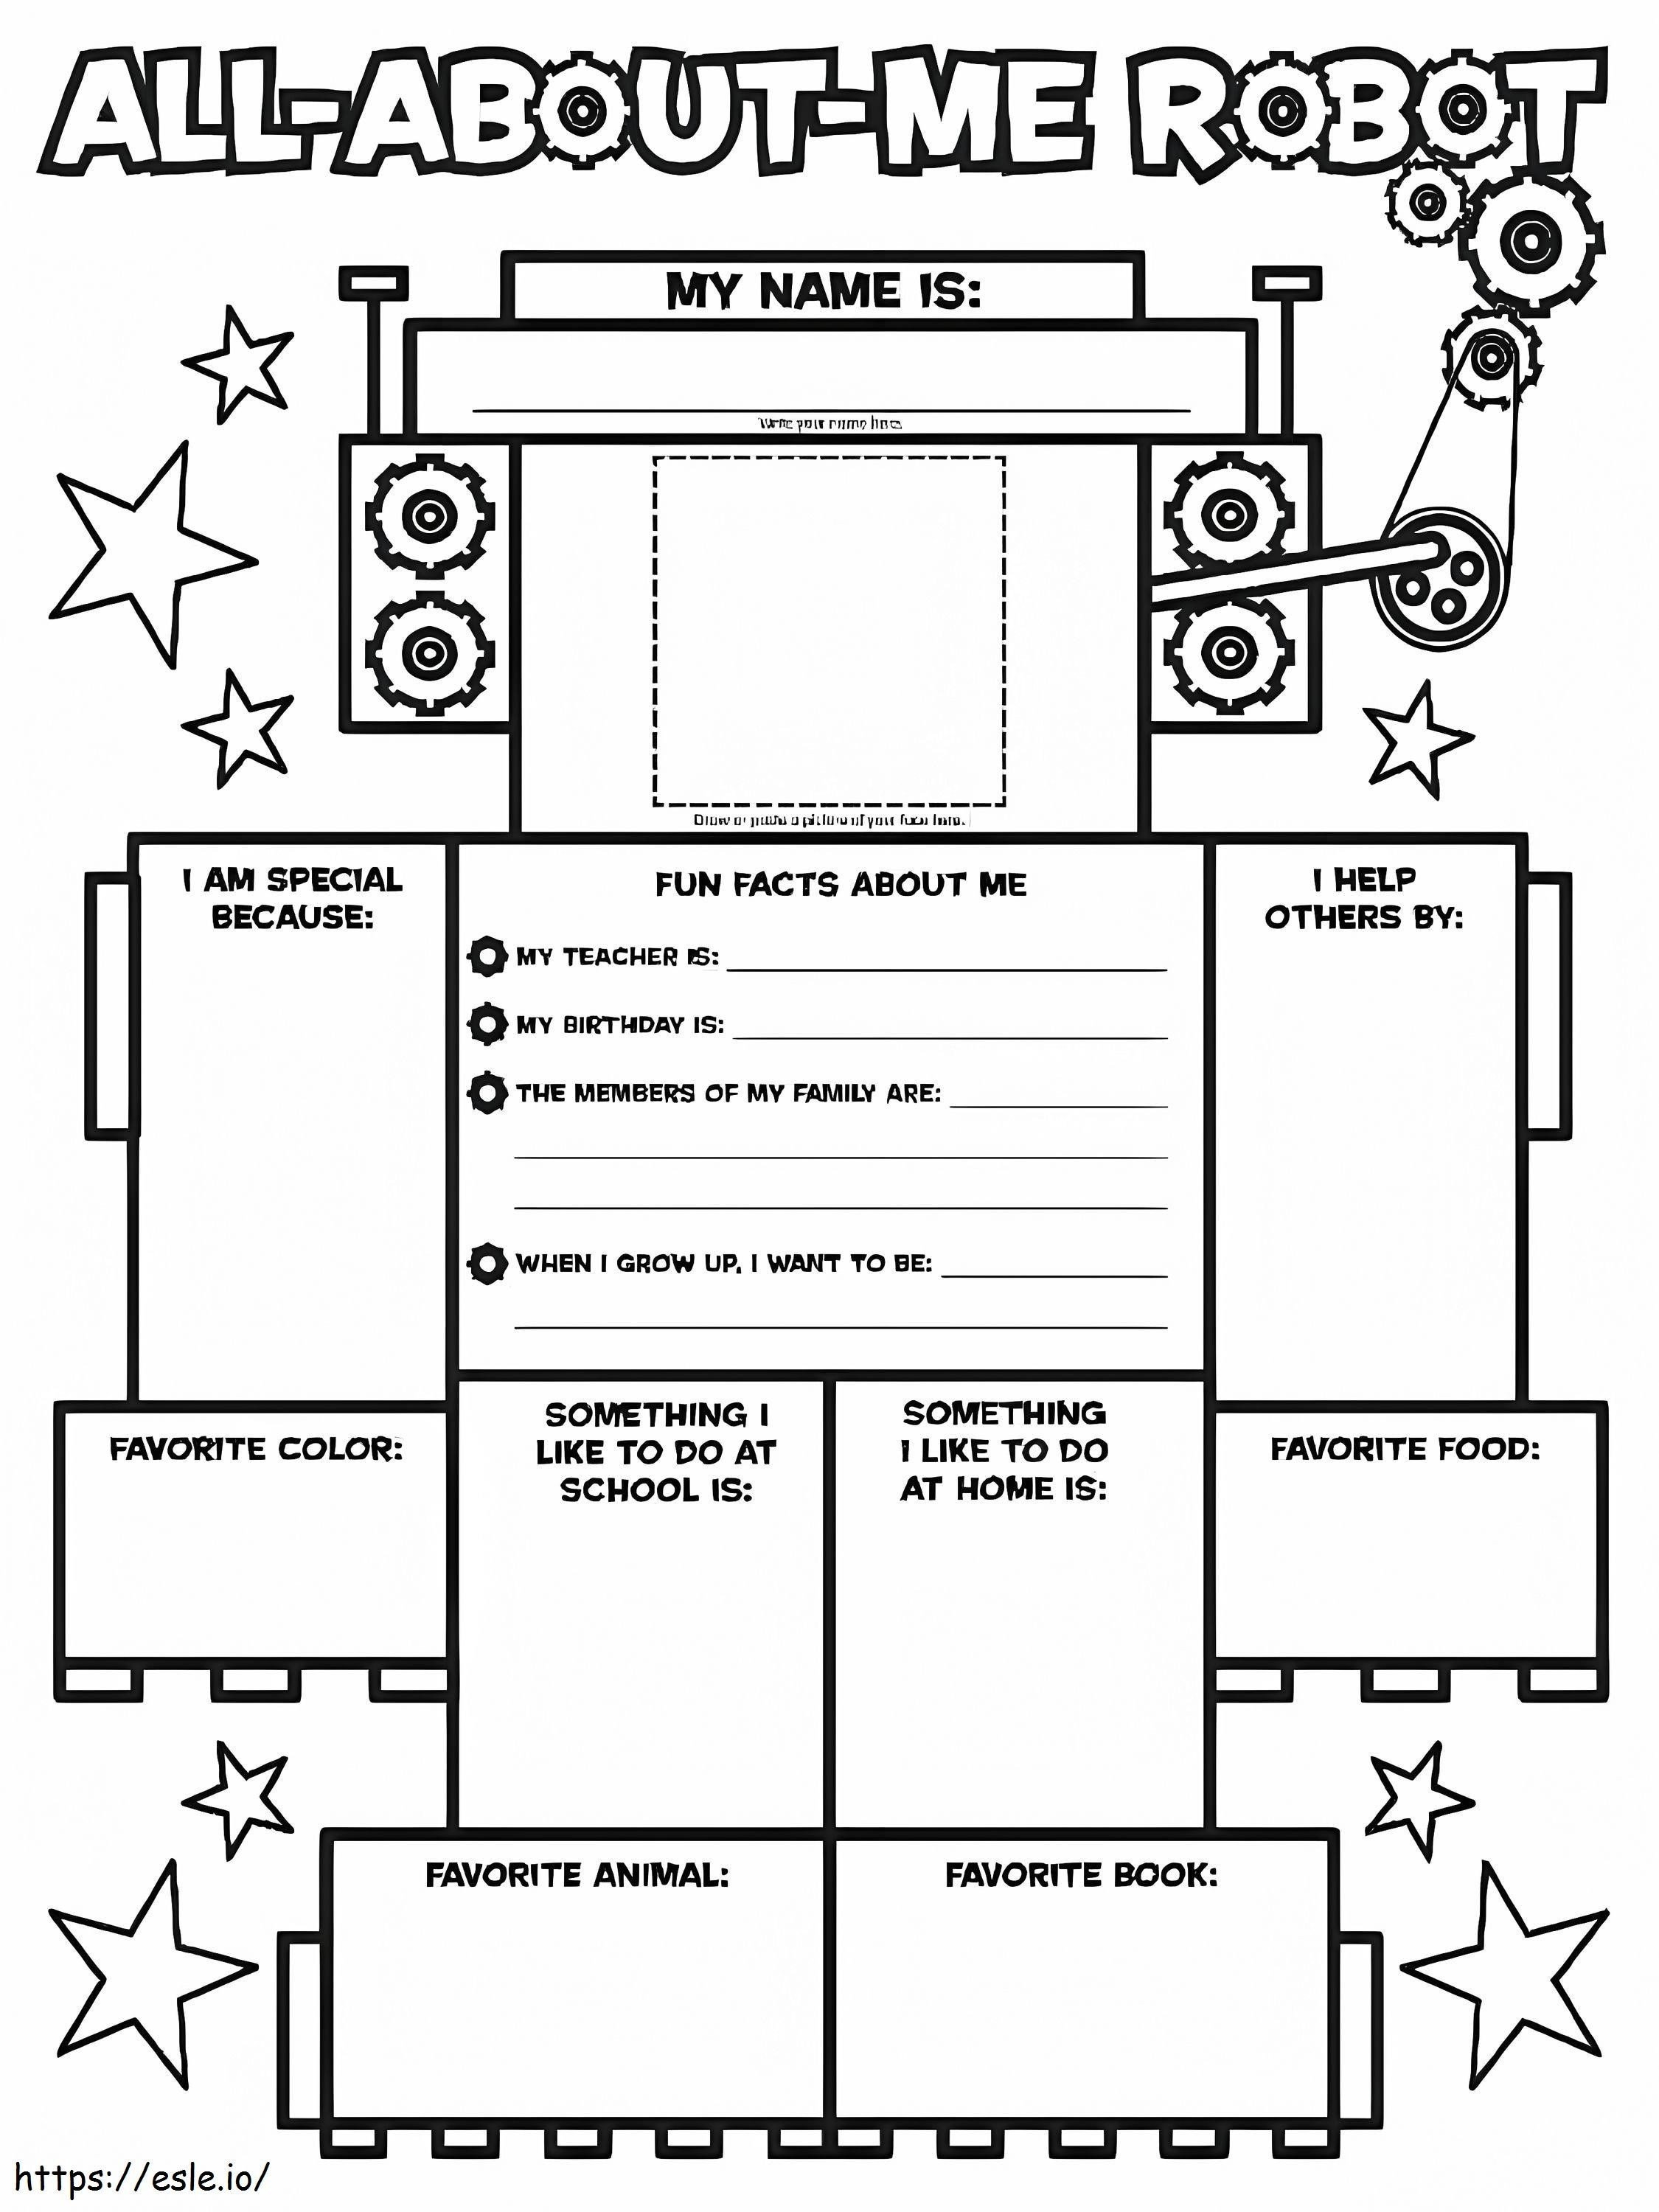 All About Me 4 coloring page